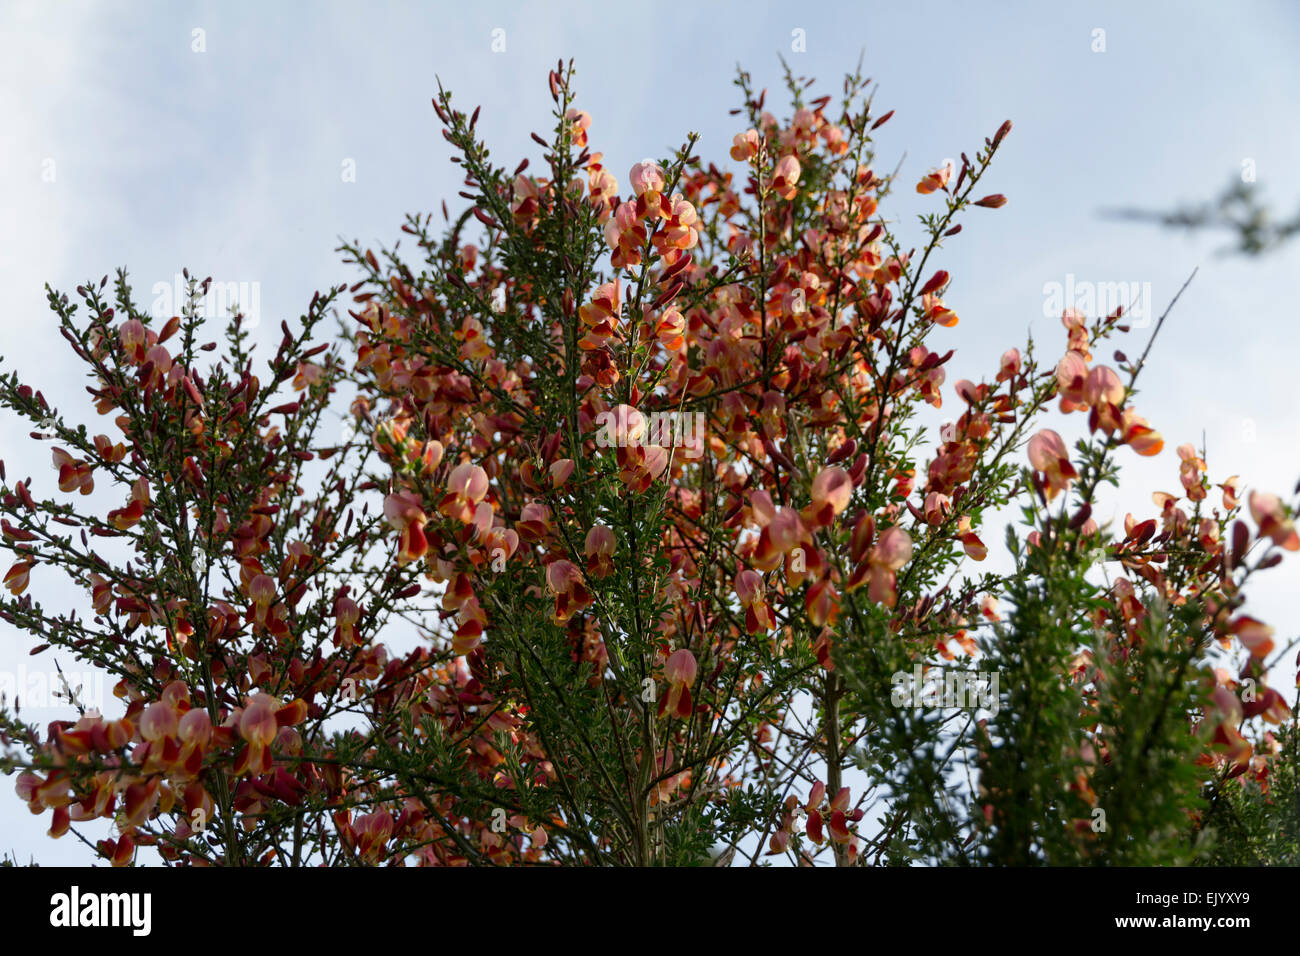 A  cultivated broom (Cytisus scoparius) bush with variegated flowers Stock Photo